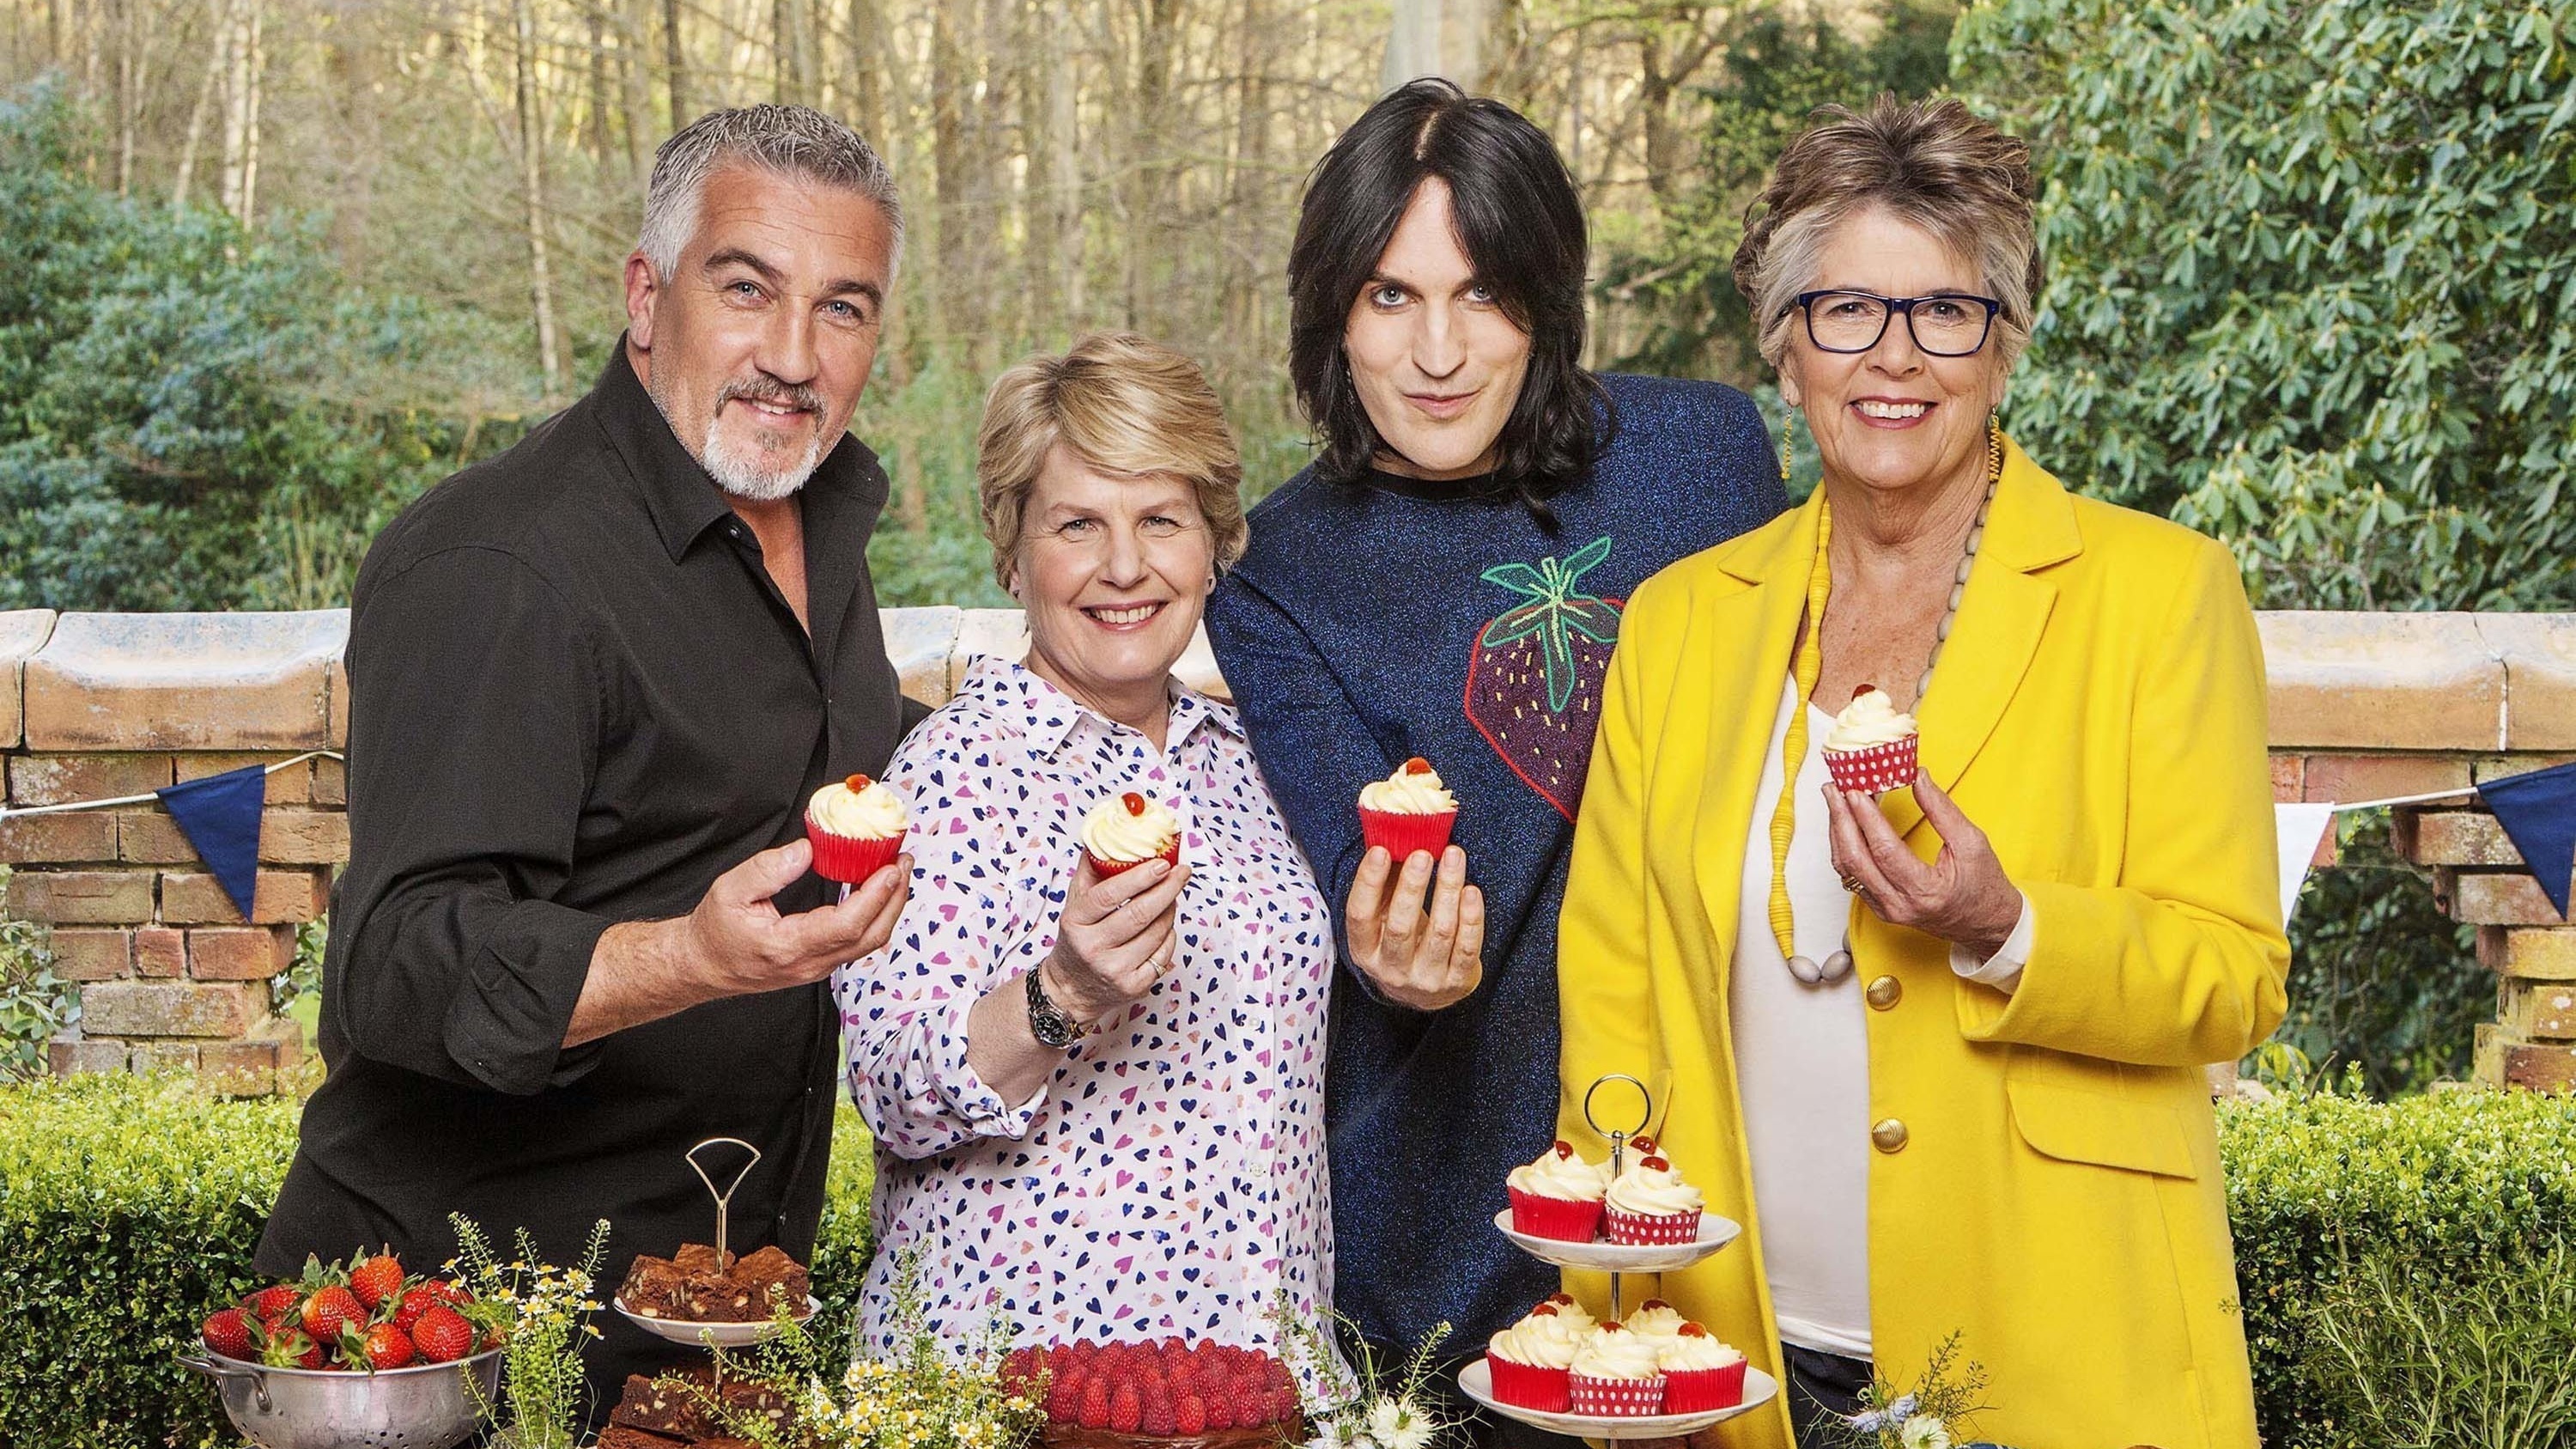 The Great British Bake Off (Love Productions/Channel 4/Mark/Press Association Images)